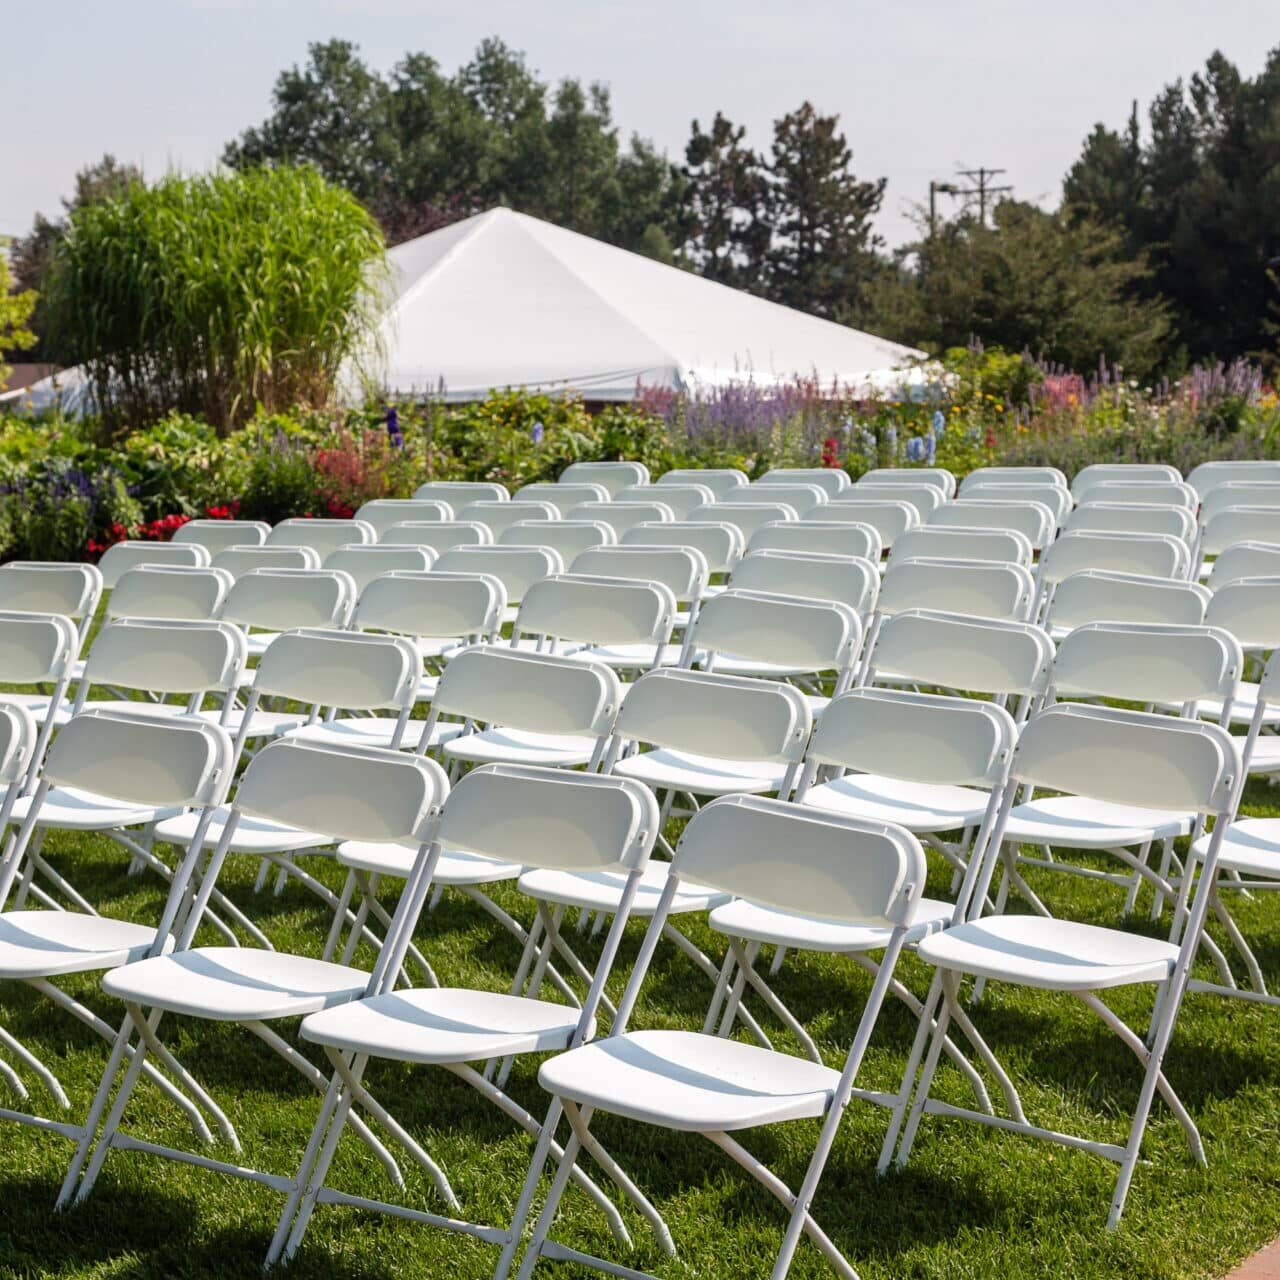 White Chairs Set Up for an Outdoor Wedding